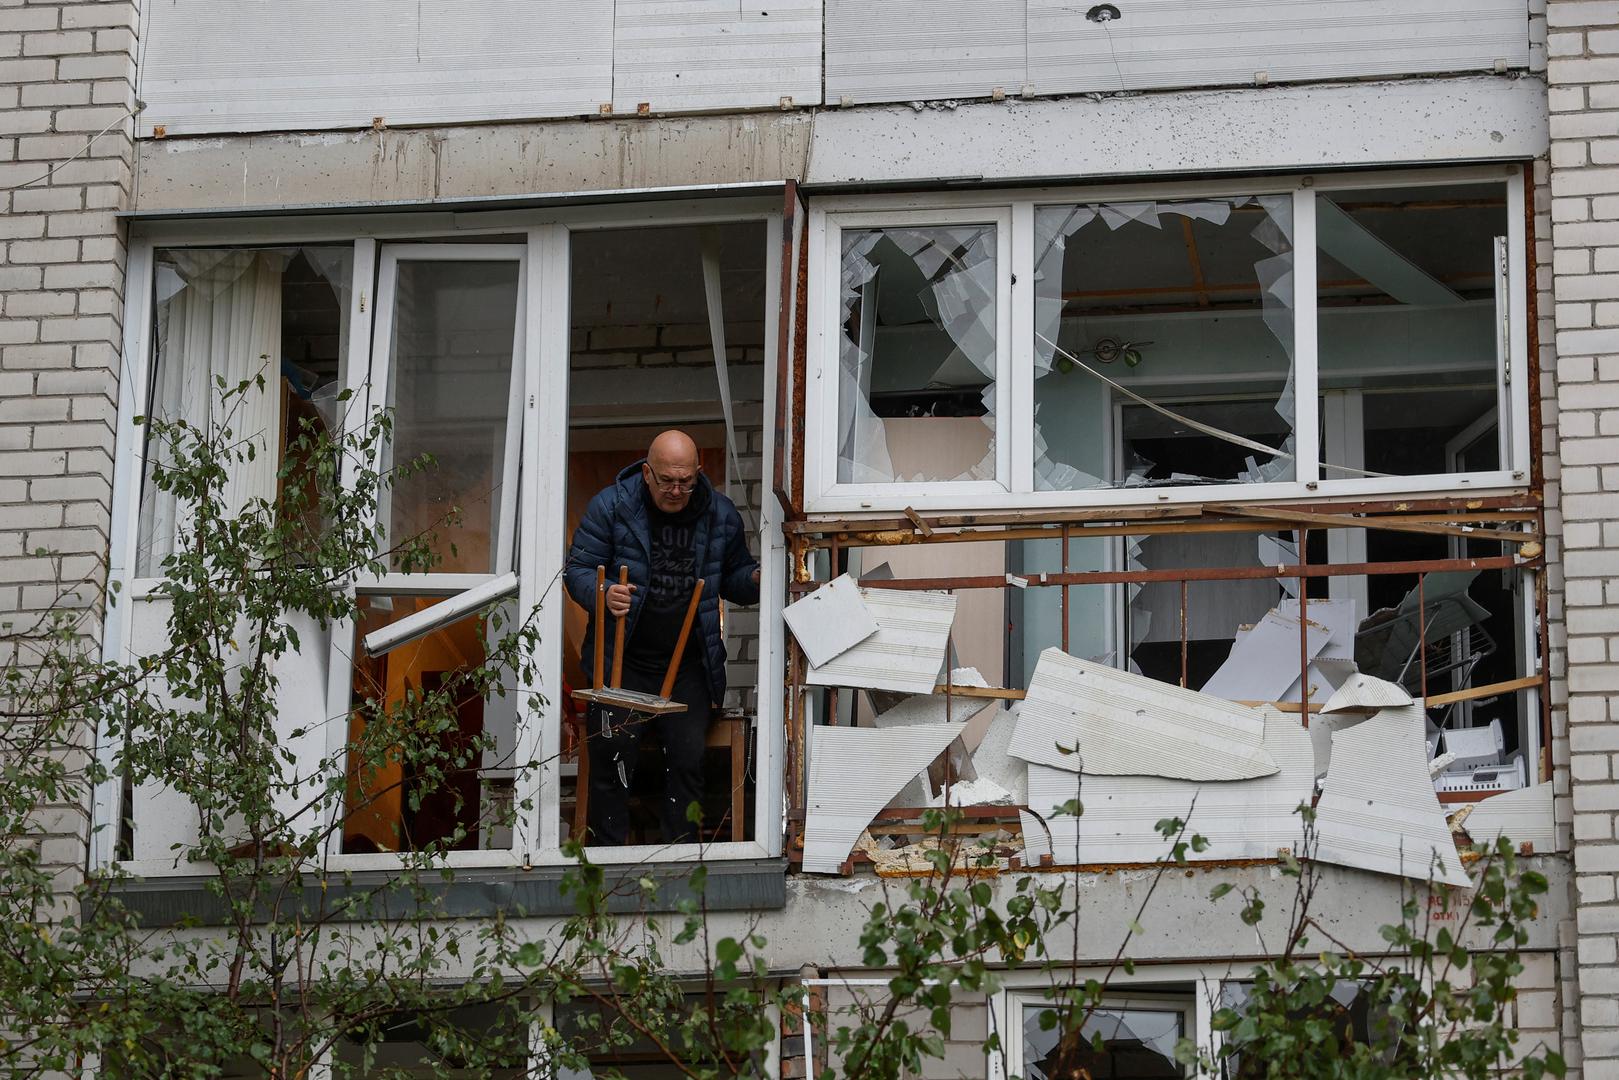 A local man throws debris out of a broken window in a residential building heavily damaged by a Russian missile attack in Mykolaiv, Ukraine October 23, 2022.  REUTERS/Valentyn Ogirenko Photo: VALENTYN OGIRENKO/REUTERS